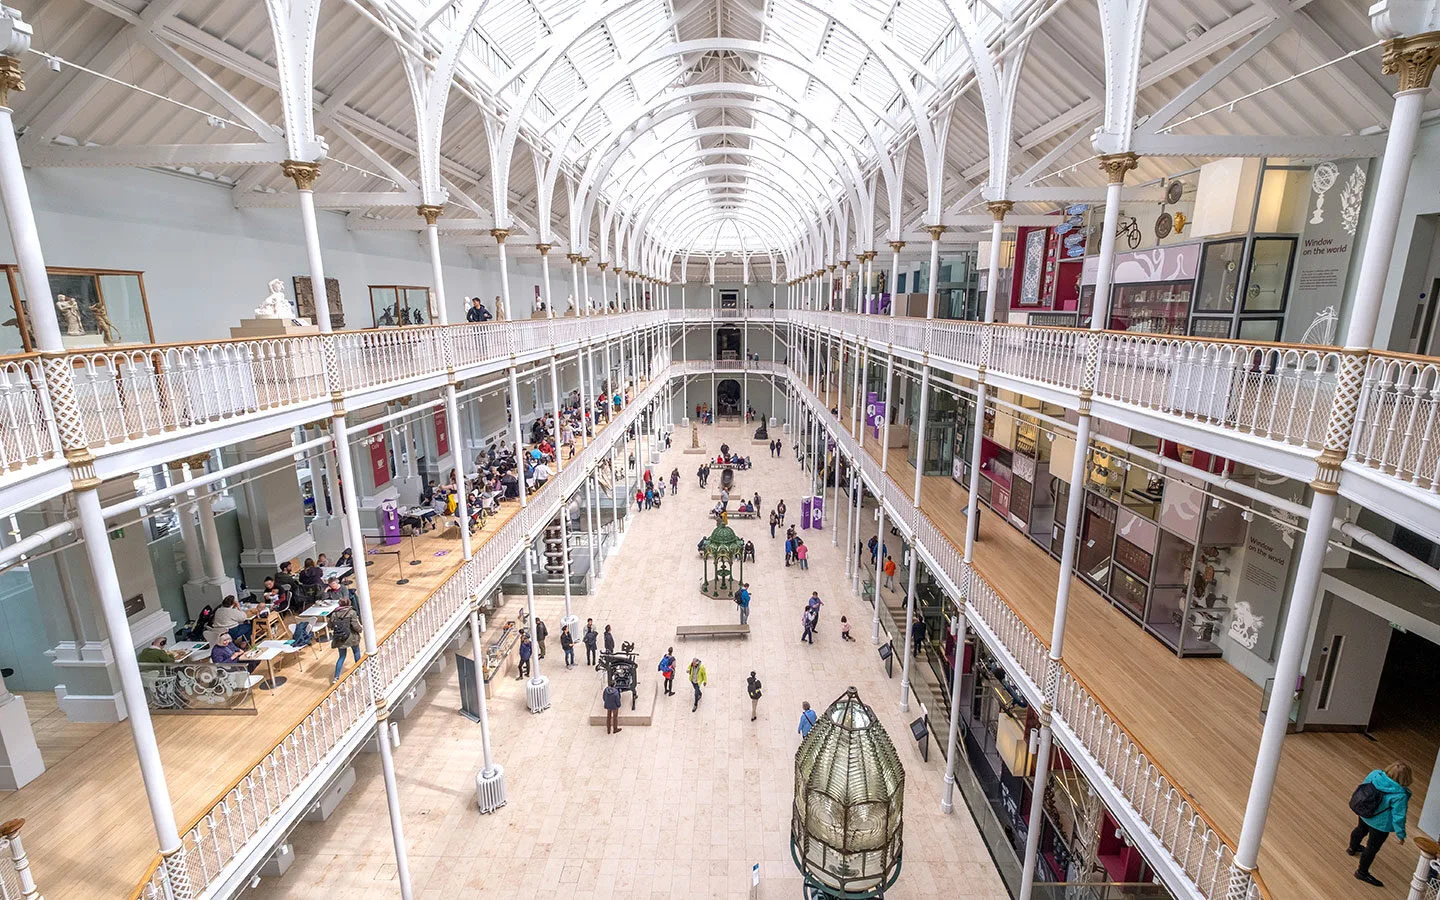 The Grand Gallery at the National Museum of Scotland